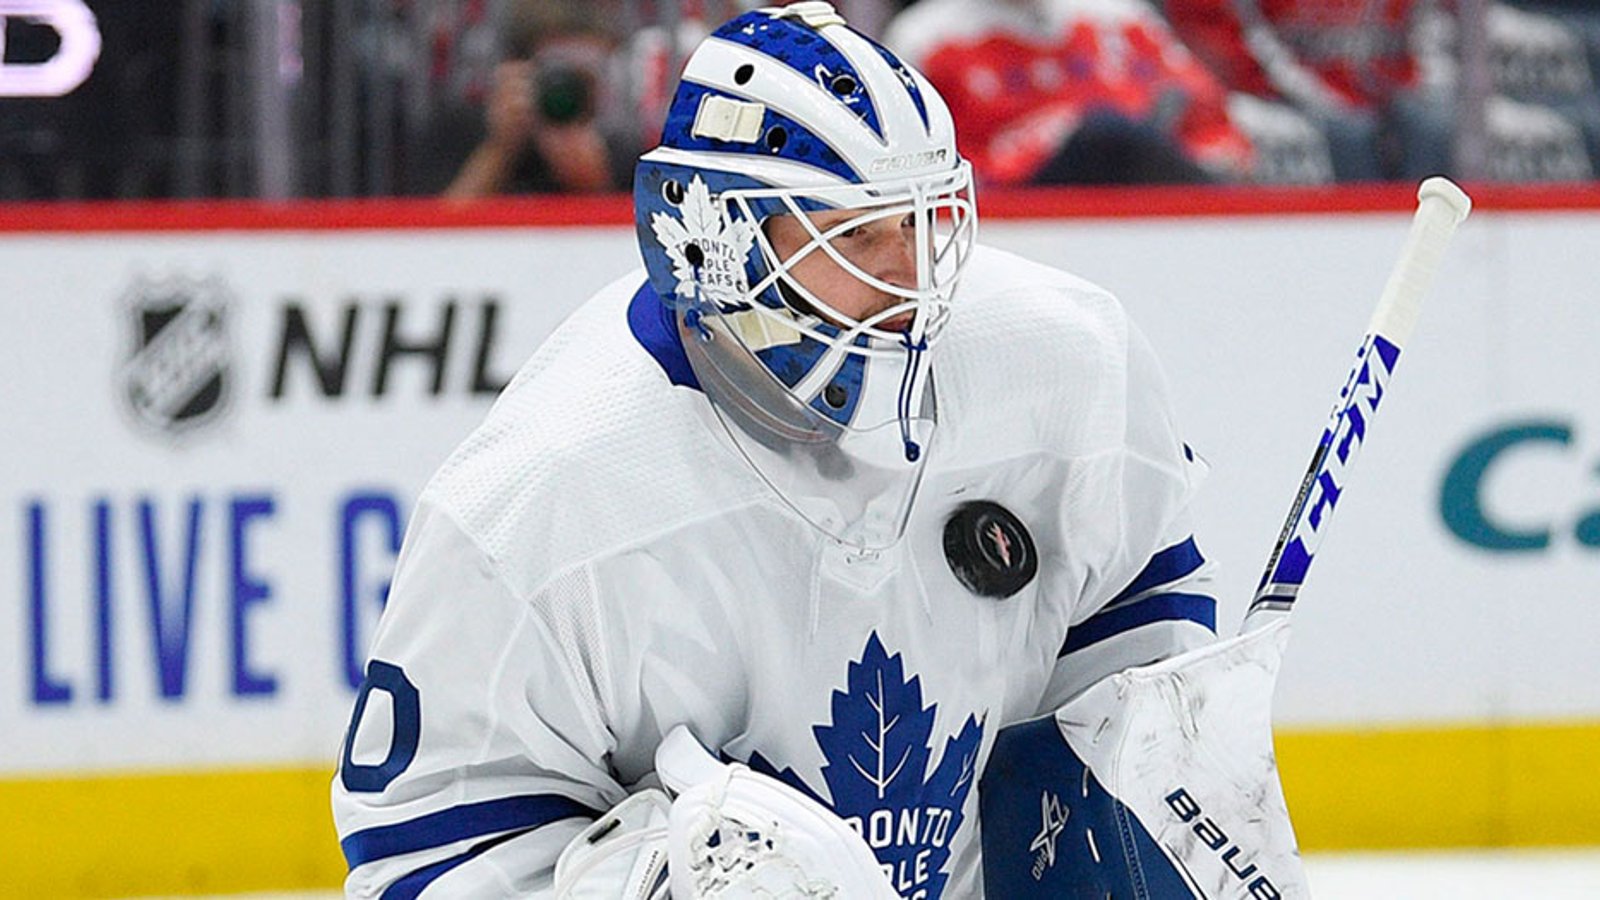 Report: Dubas eyeing the trade market “every day” for a backup goalie